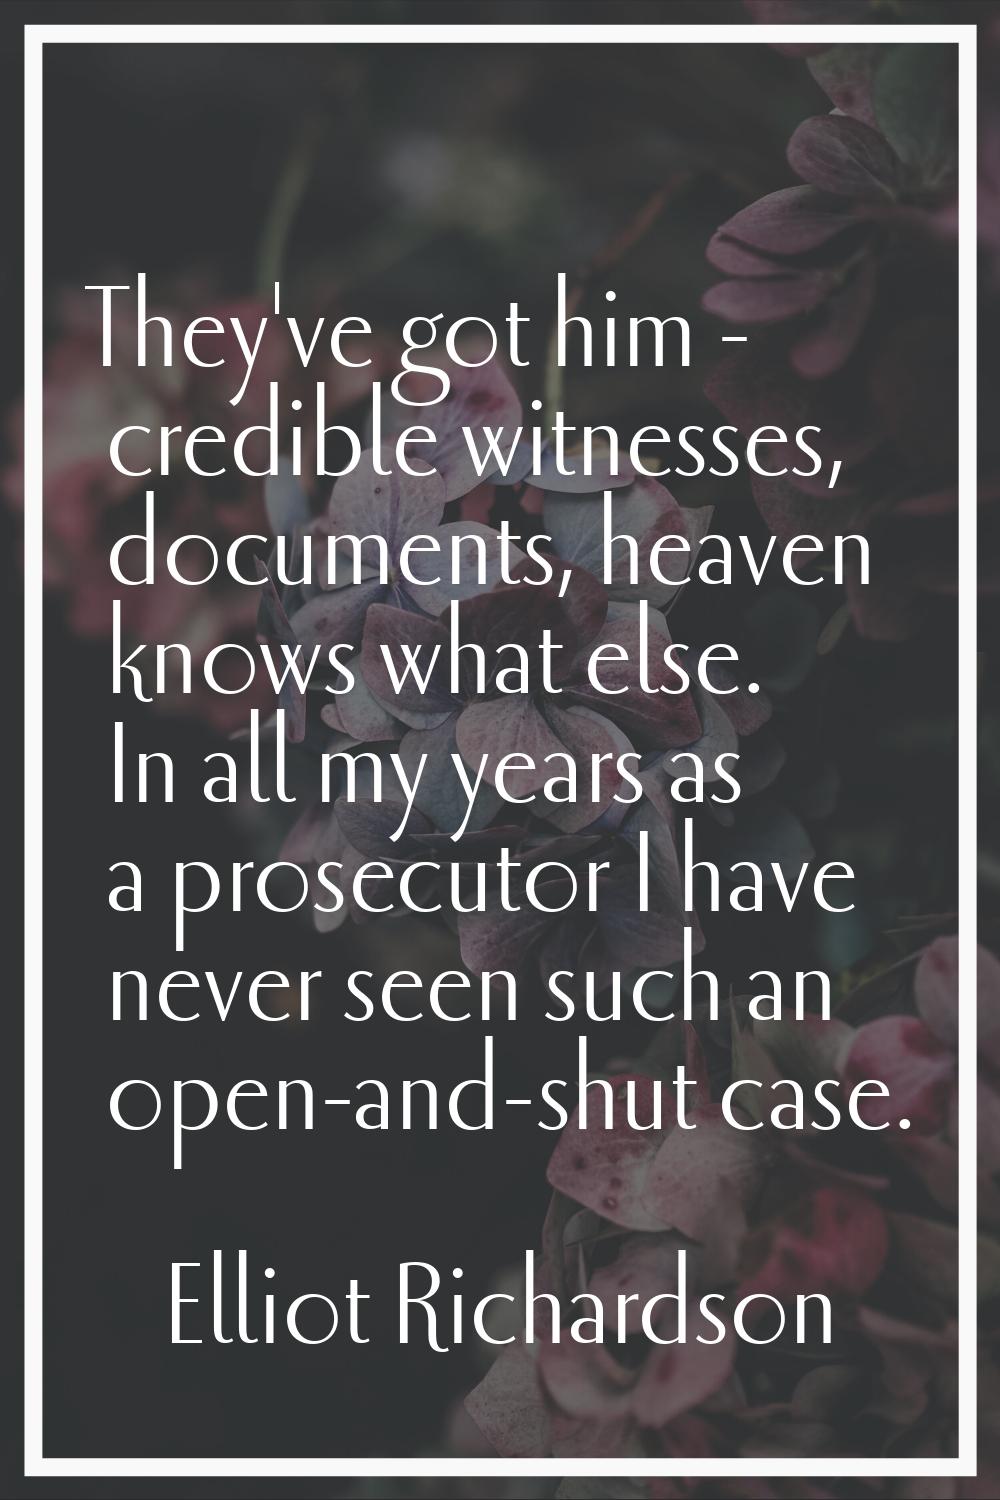 They've got him - credible witnesses, documents, heaven knows what else. In all my years as a prose